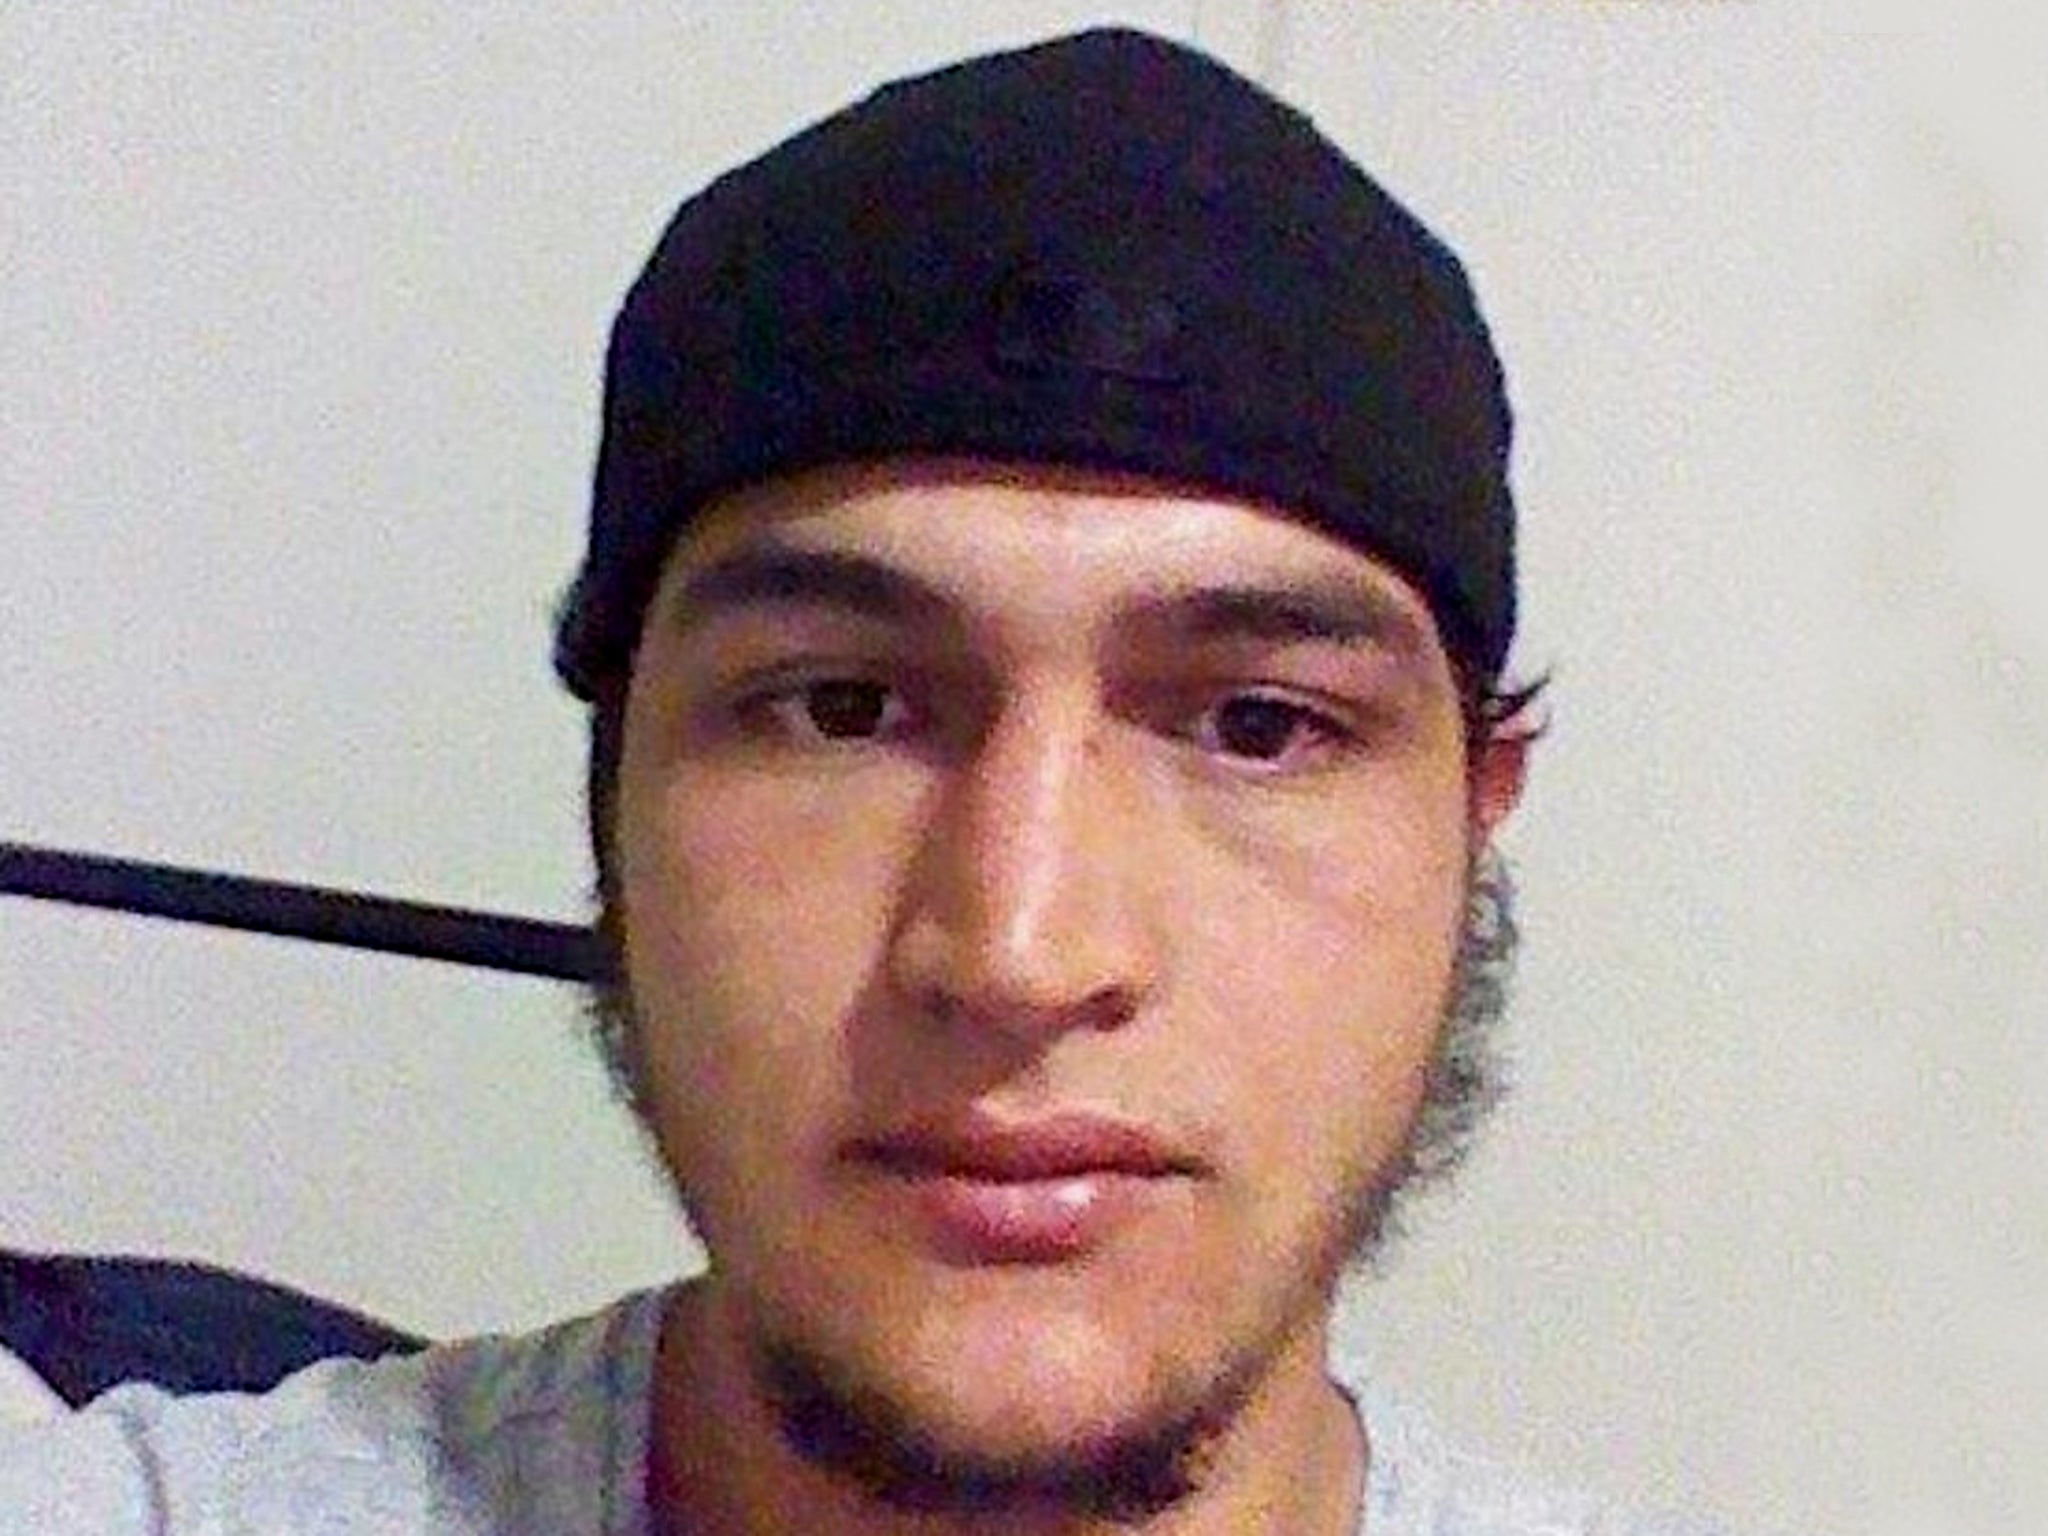 Suspect Anis Amri travelled through three countries after the Berlin attack